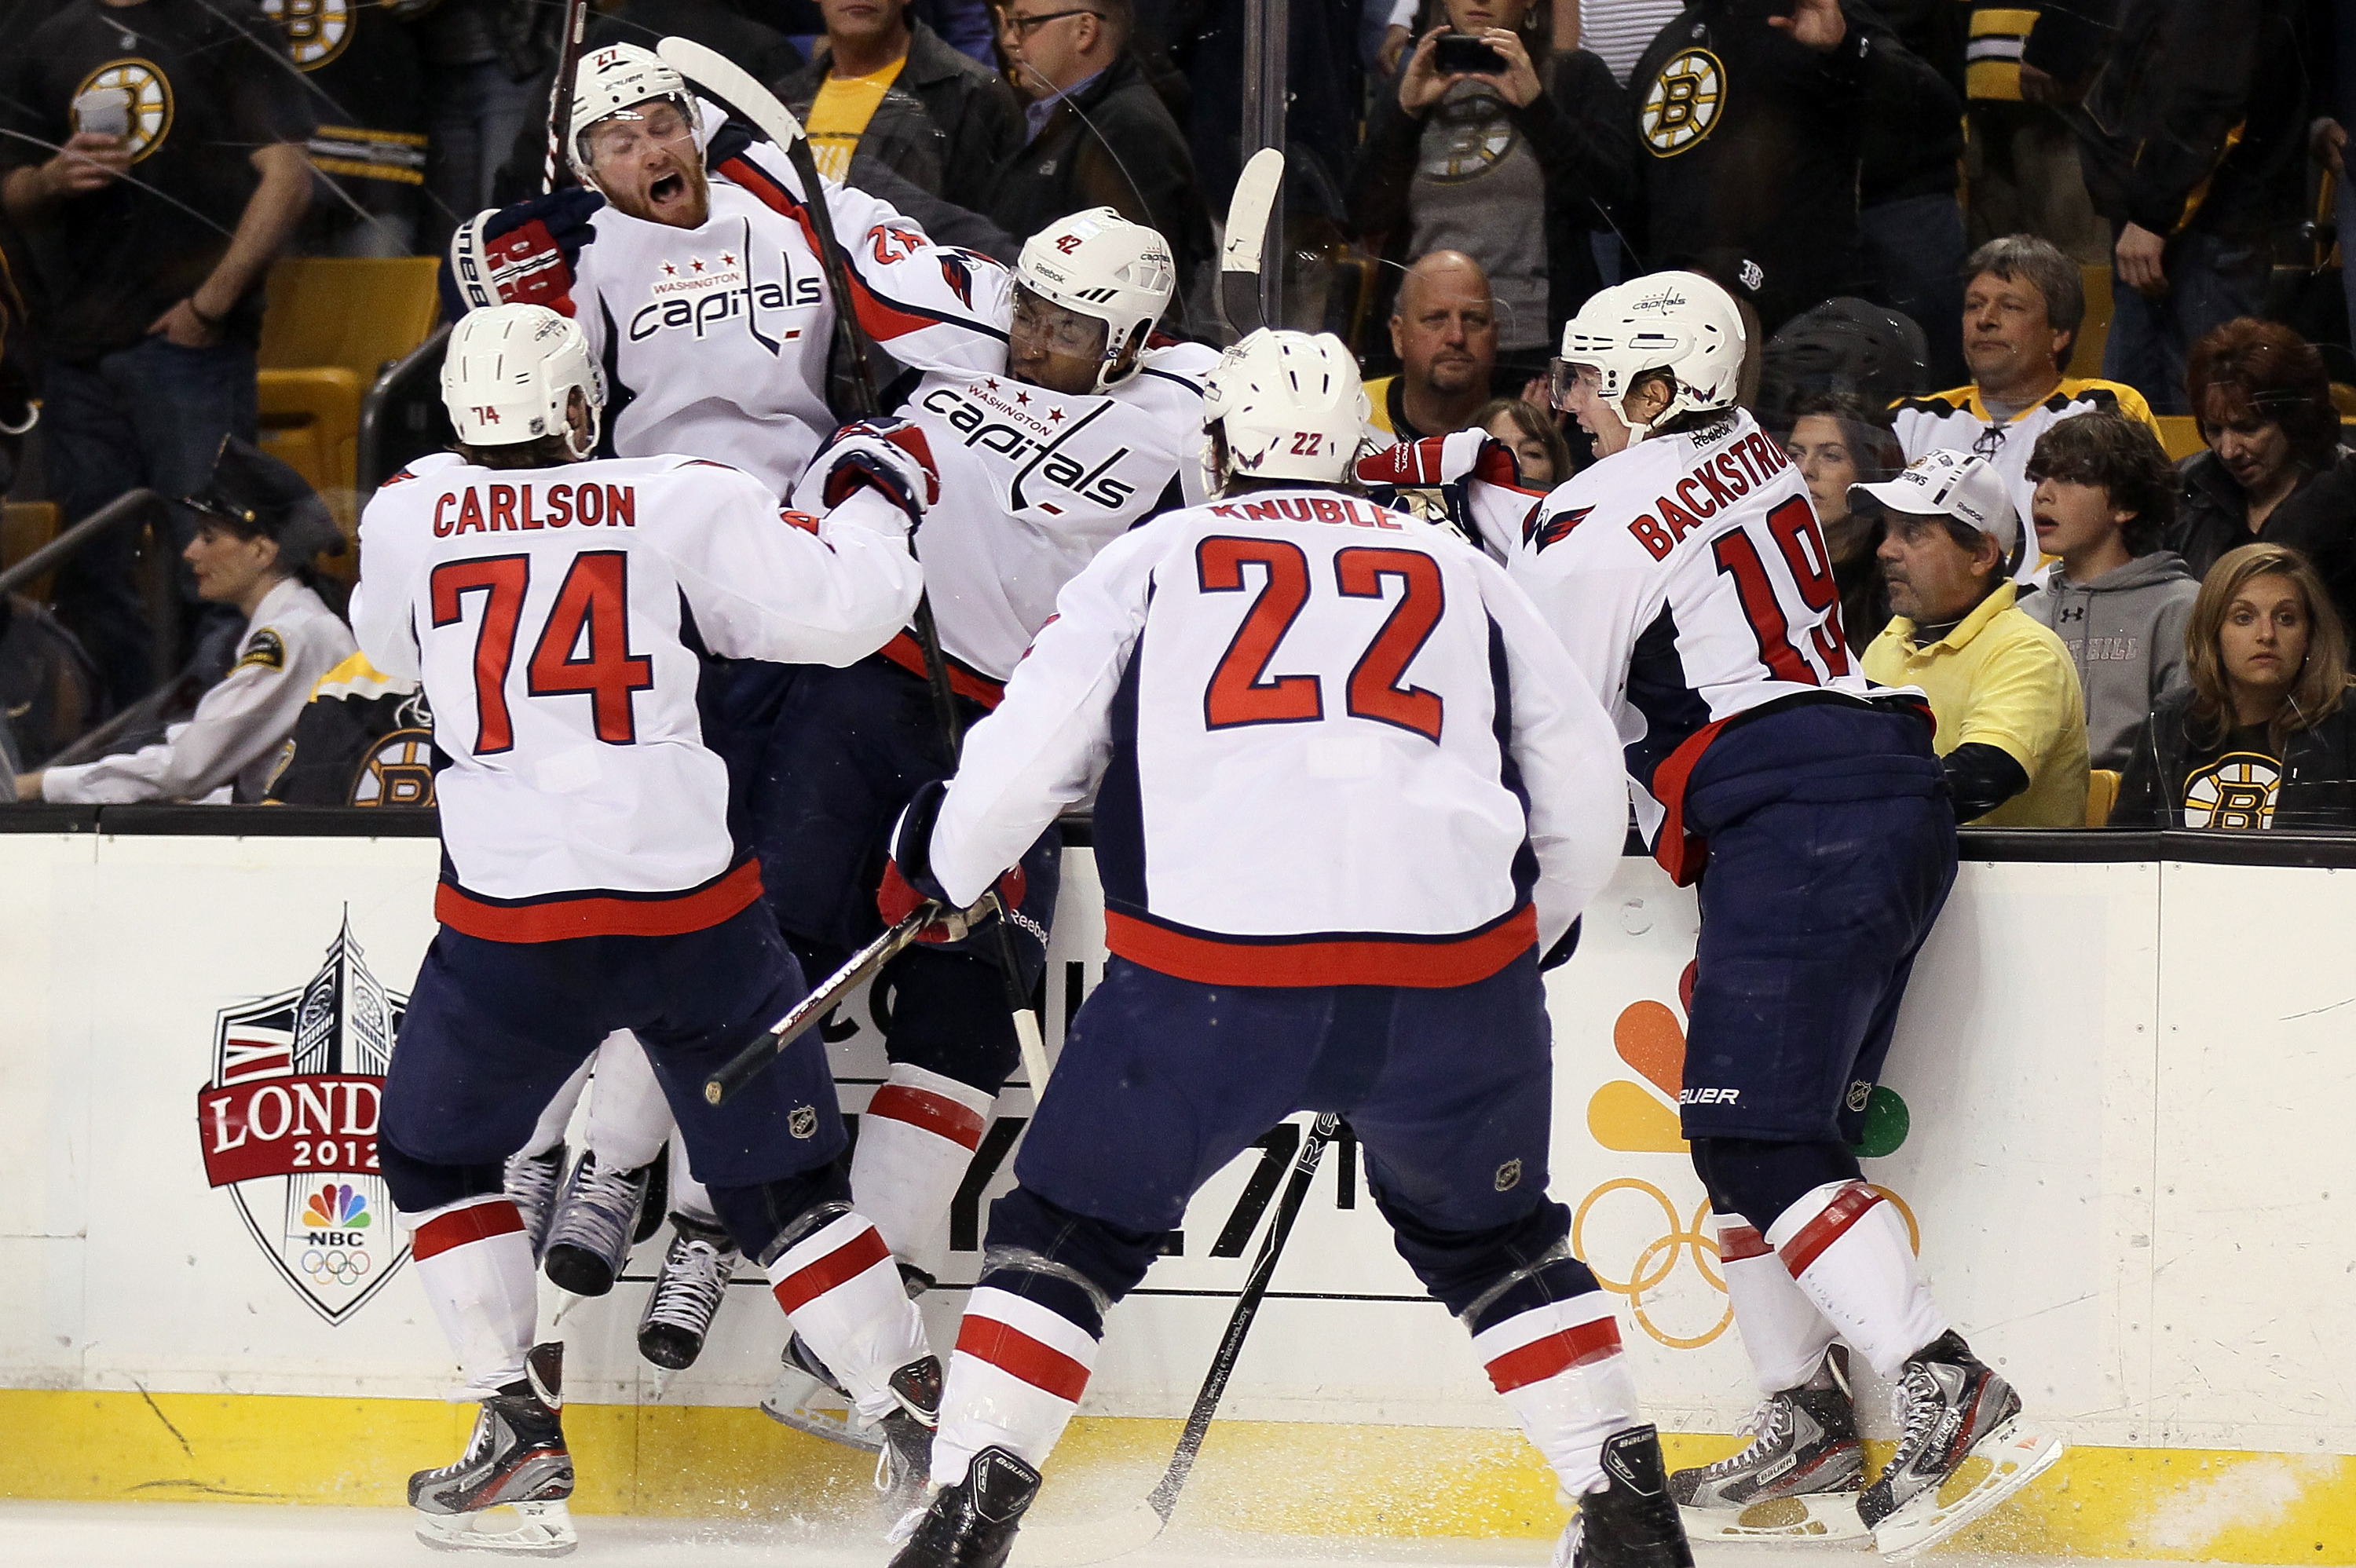 Washington Capitals: When Dale Hunter came through in overtime